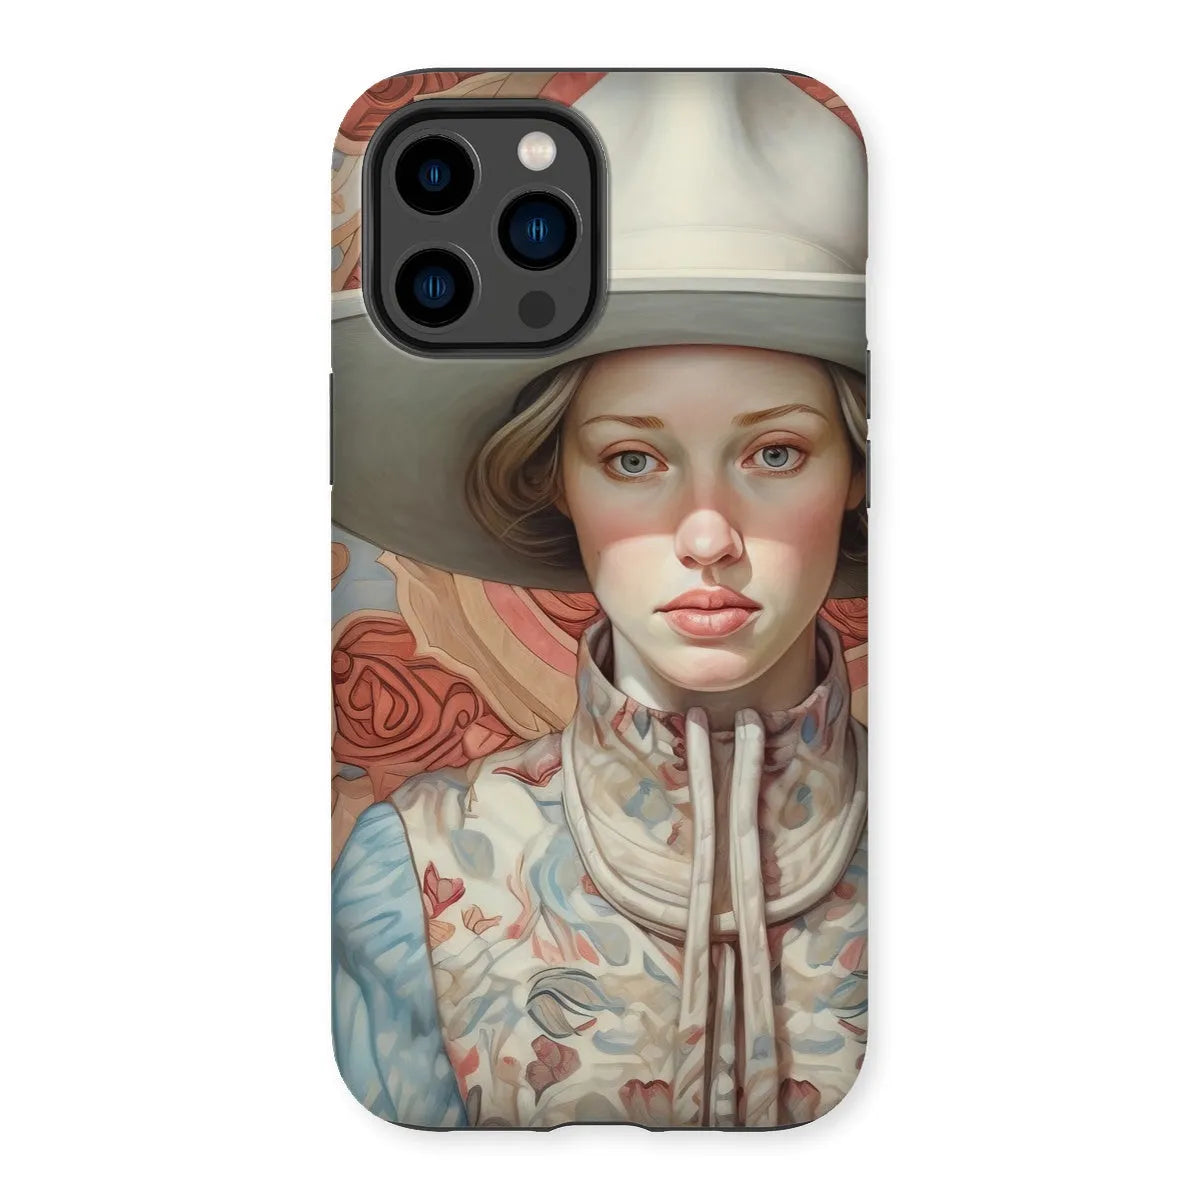 Lottie The Lesbian Cowgirl - Sapphic Art Phone Case - Iphone 14 Pro Max / Matte - Mobile Phone Cases - Aesthetic Art